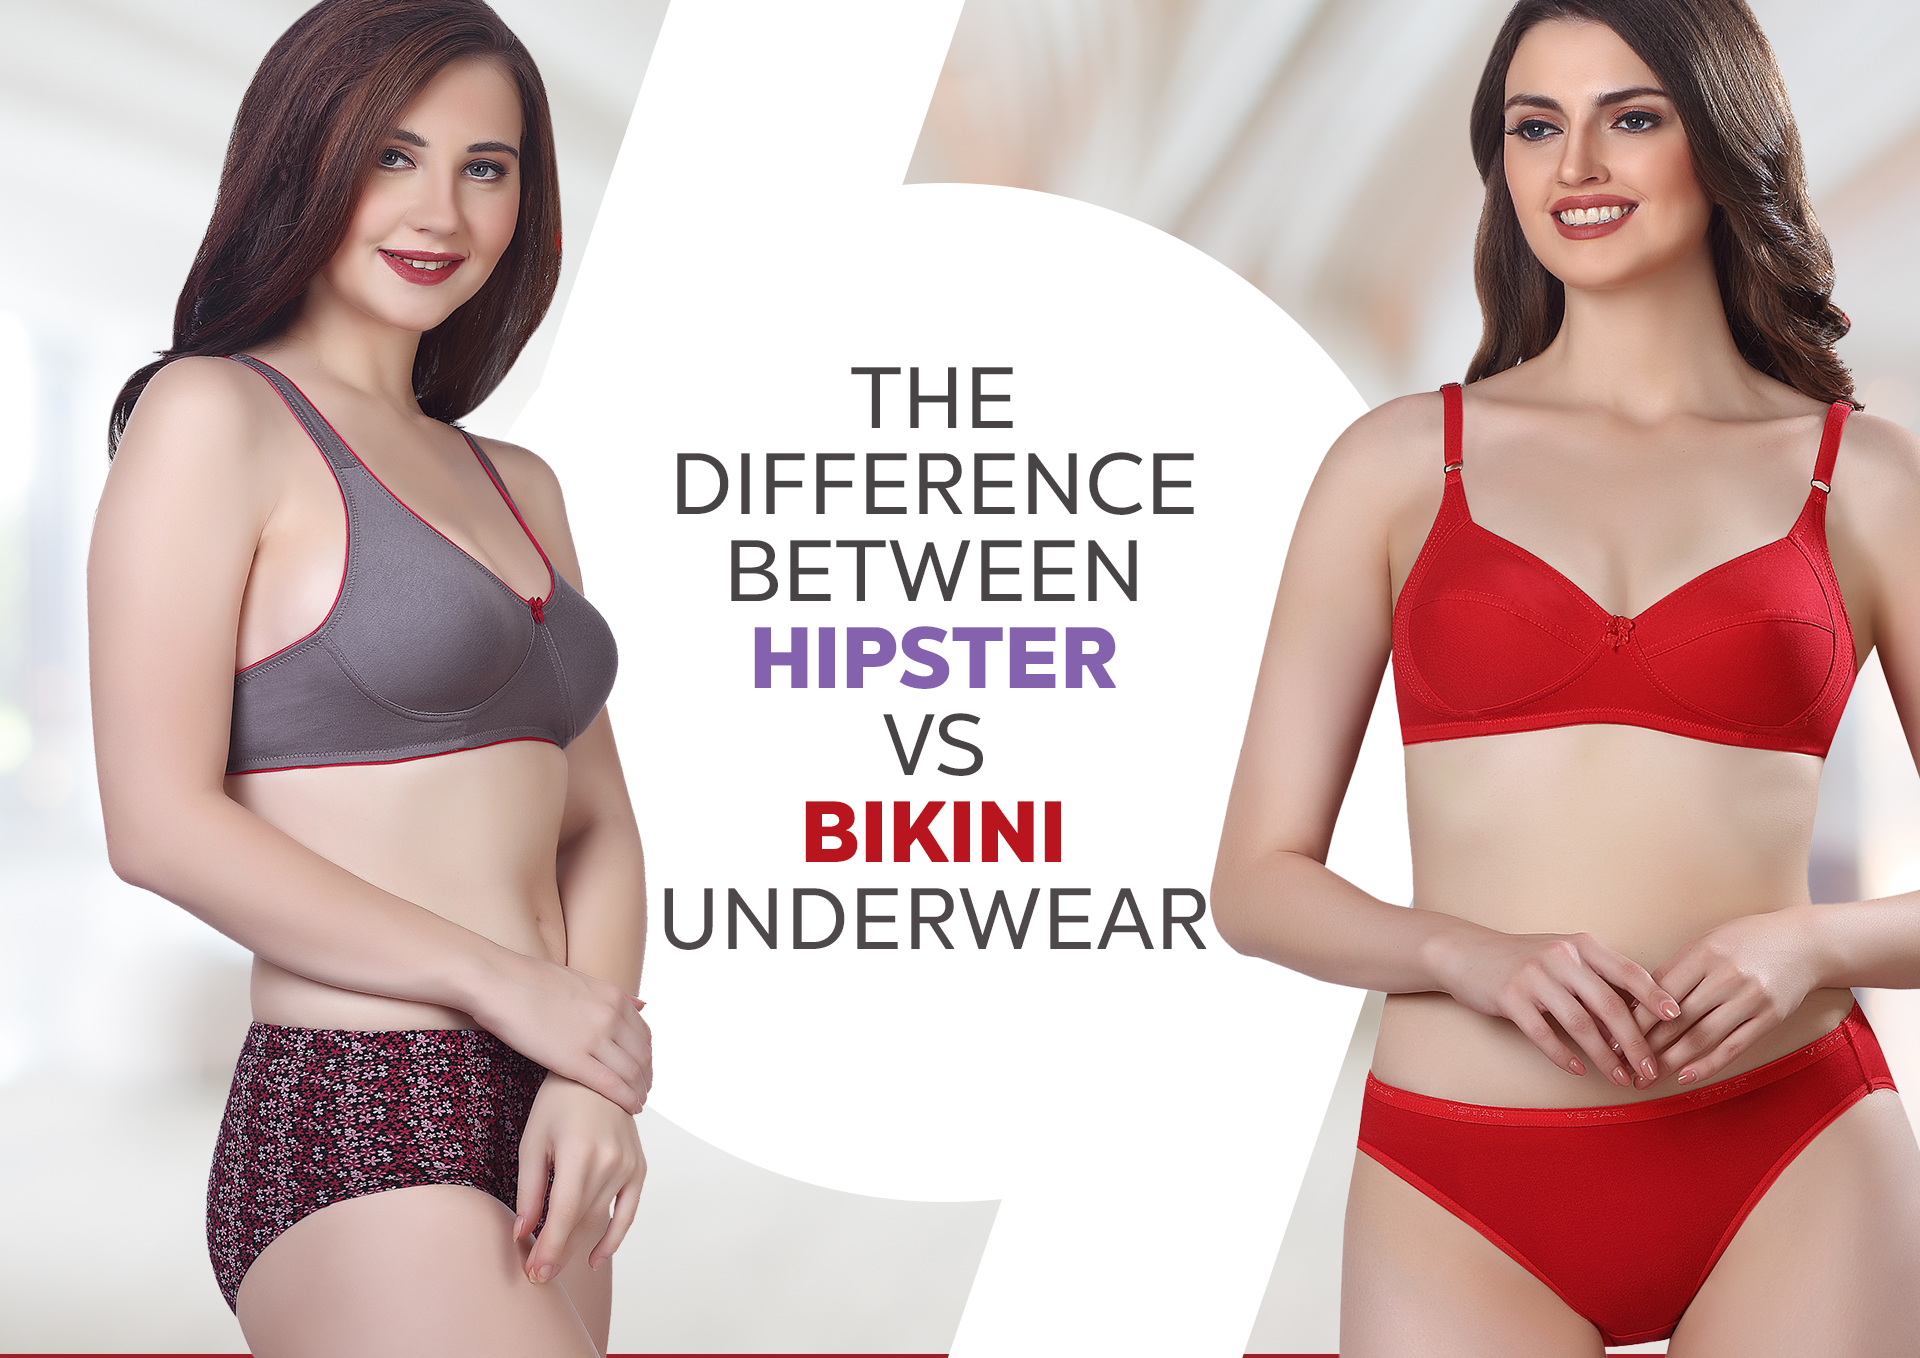 What is the Difference Between Hipster and Bikini Panties